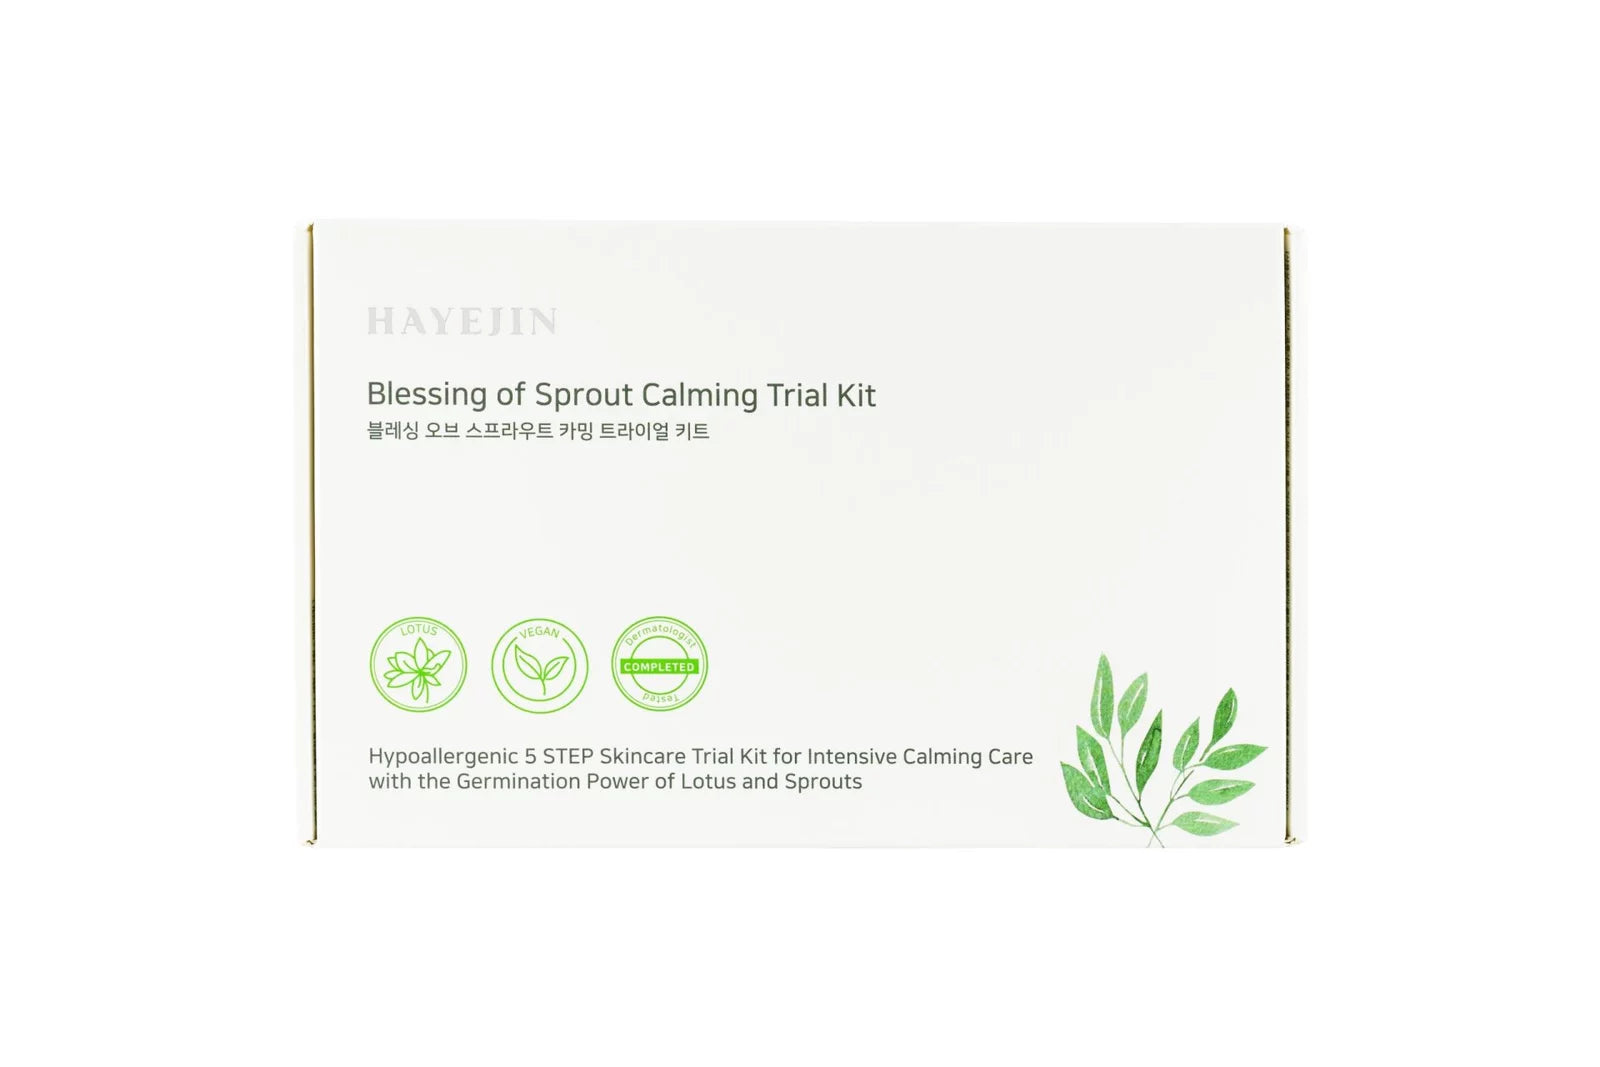 Hayejin Blessing of Sprout Calming Trial Kit 5 steps